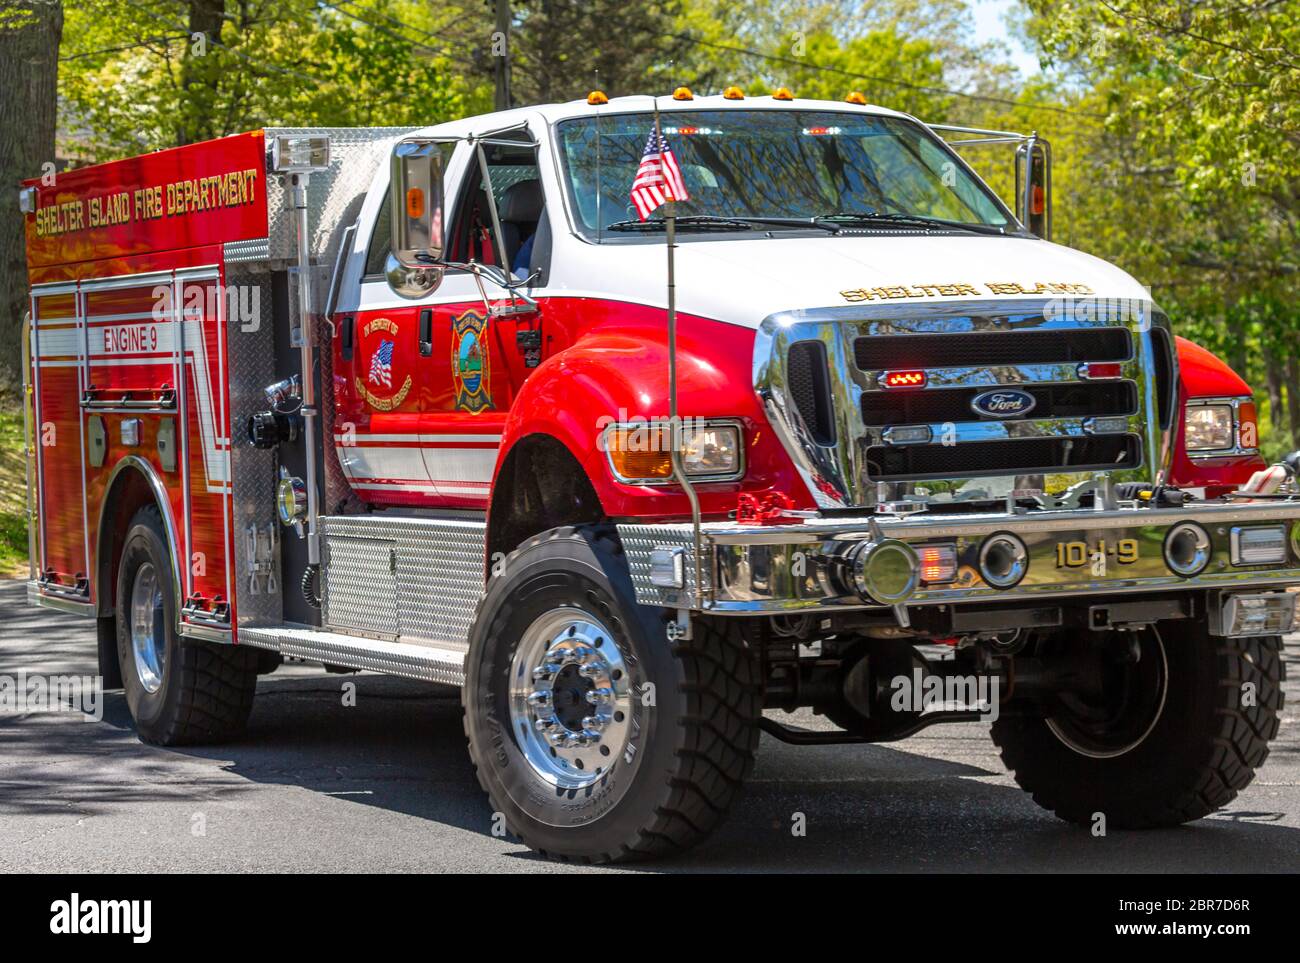 Large red and white Shelter Island fire department truck Stock Photo